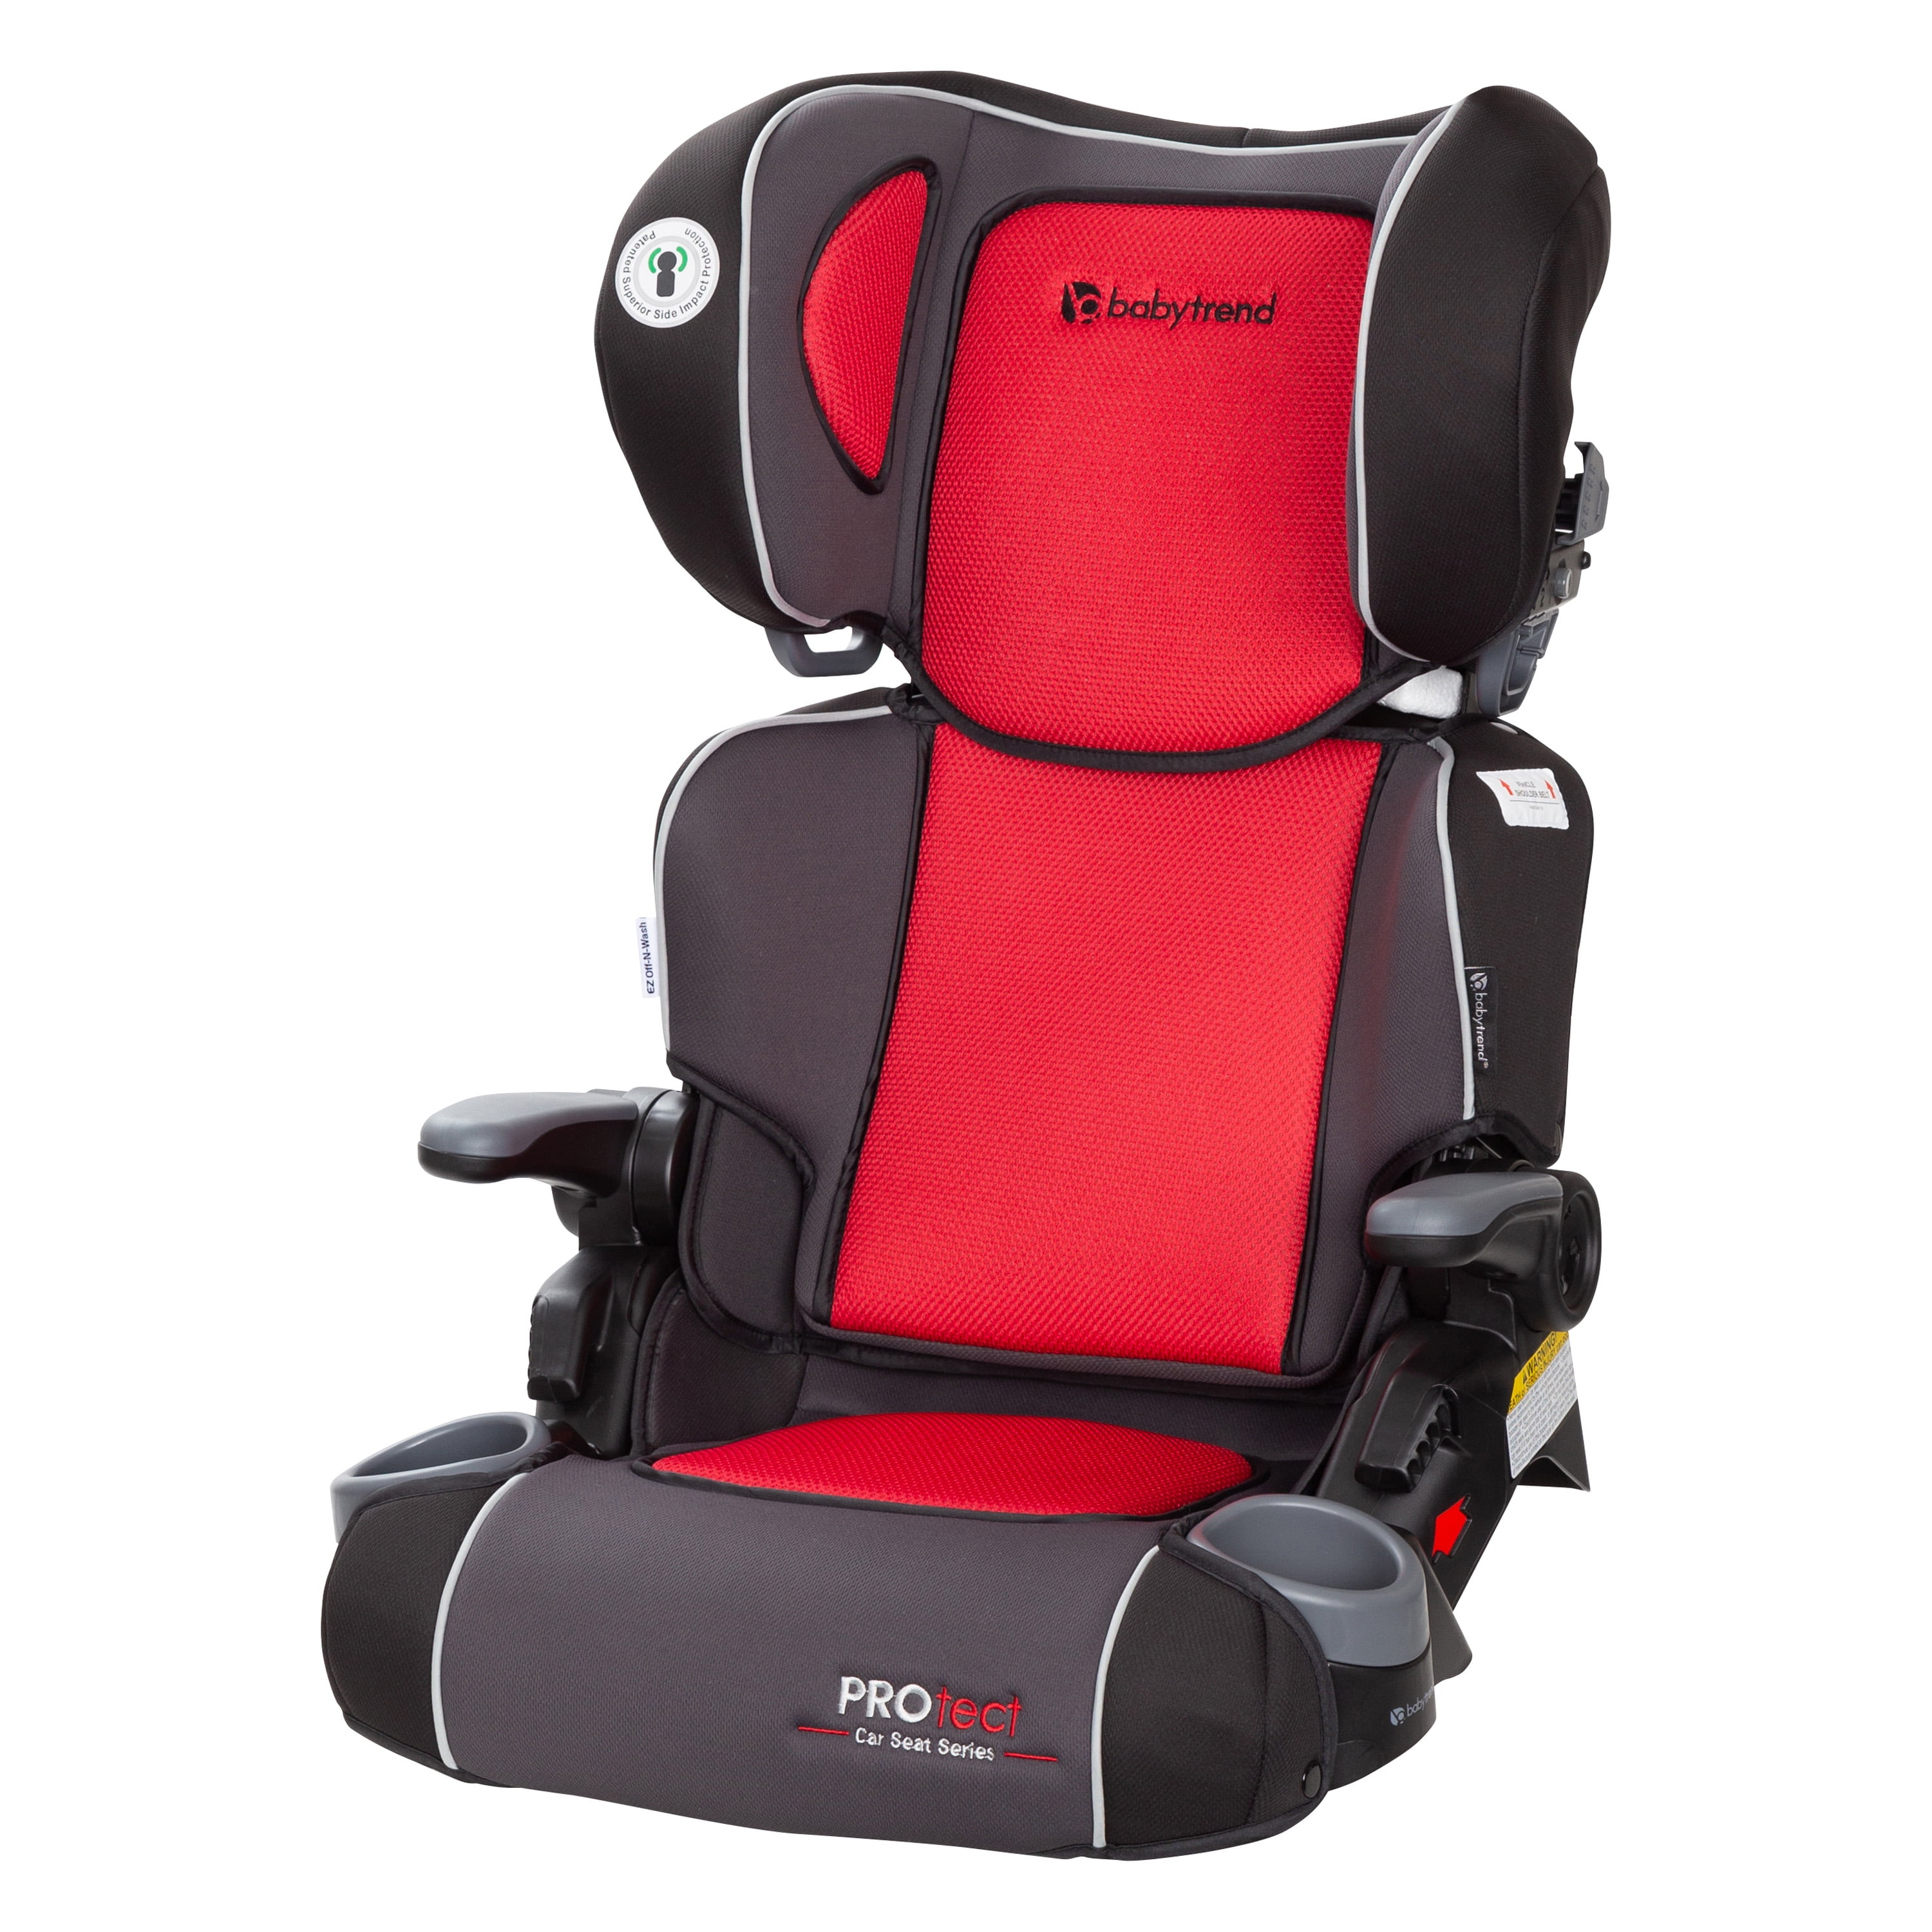 Car Seat For 50 Lb 3 Year Old Free, What Car Seat Does A 5 Year Old